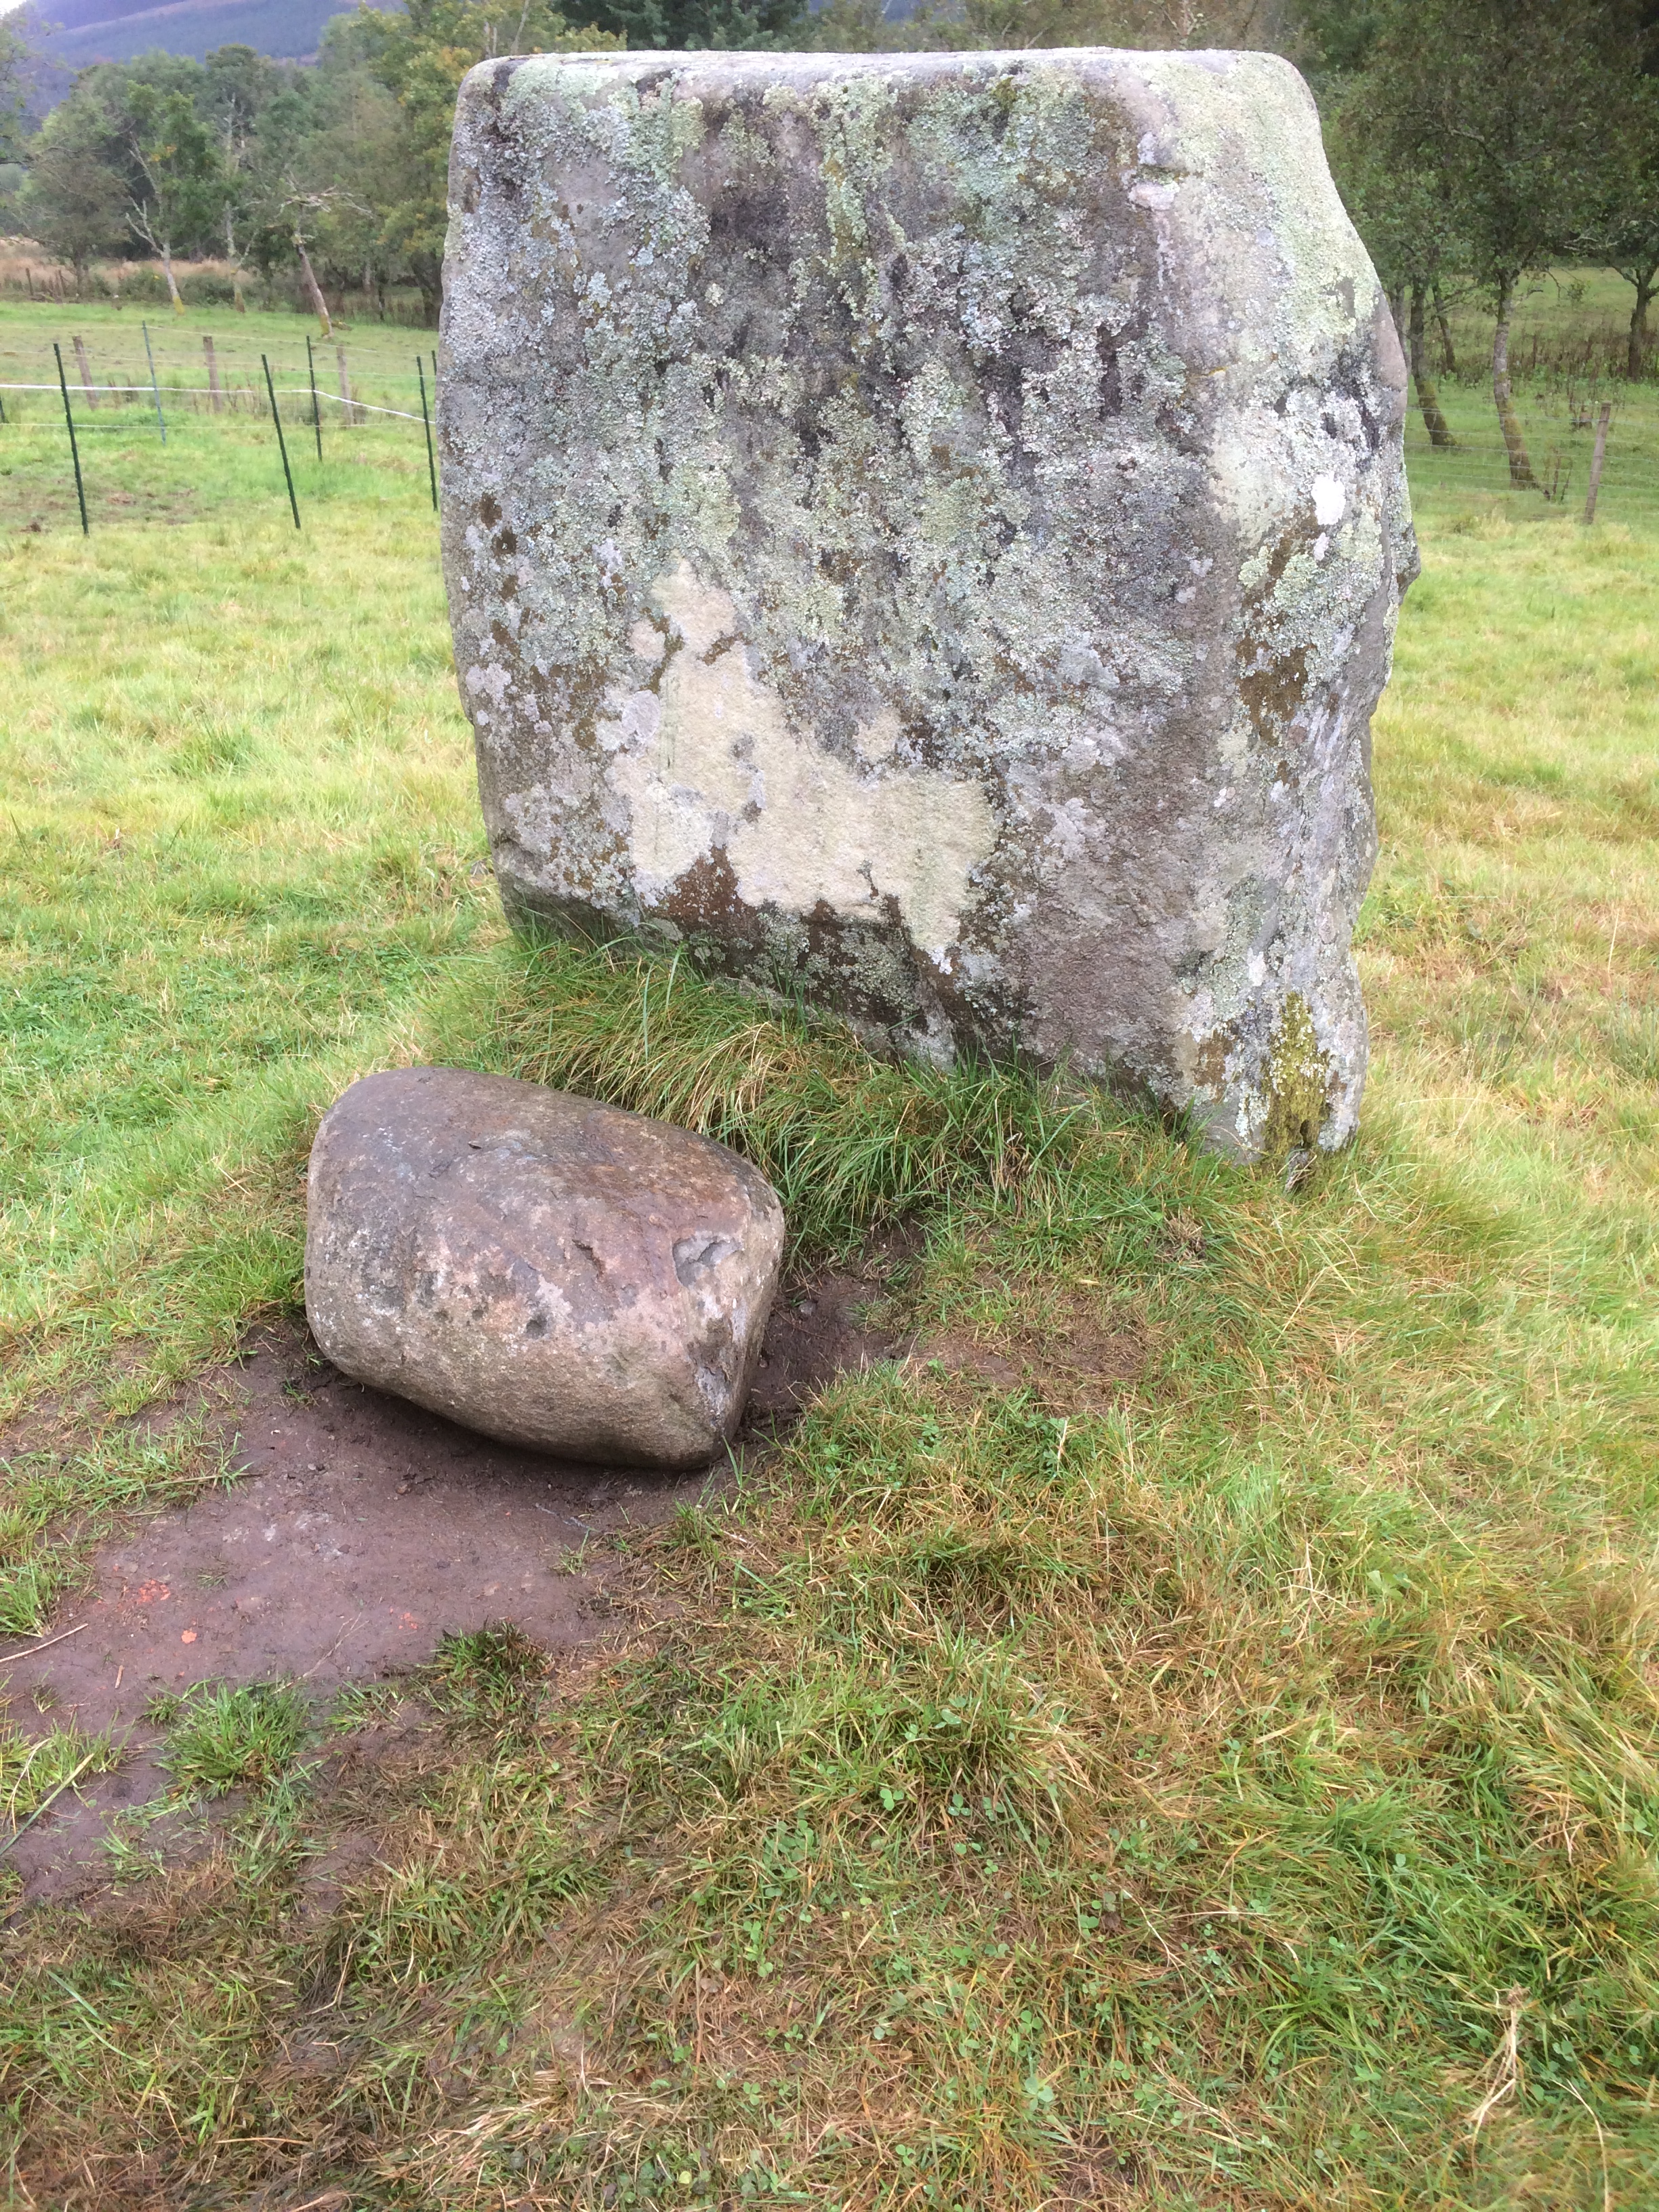 The Pudrac monolith with the puterach stone at its base, photo by Peter Lawrie